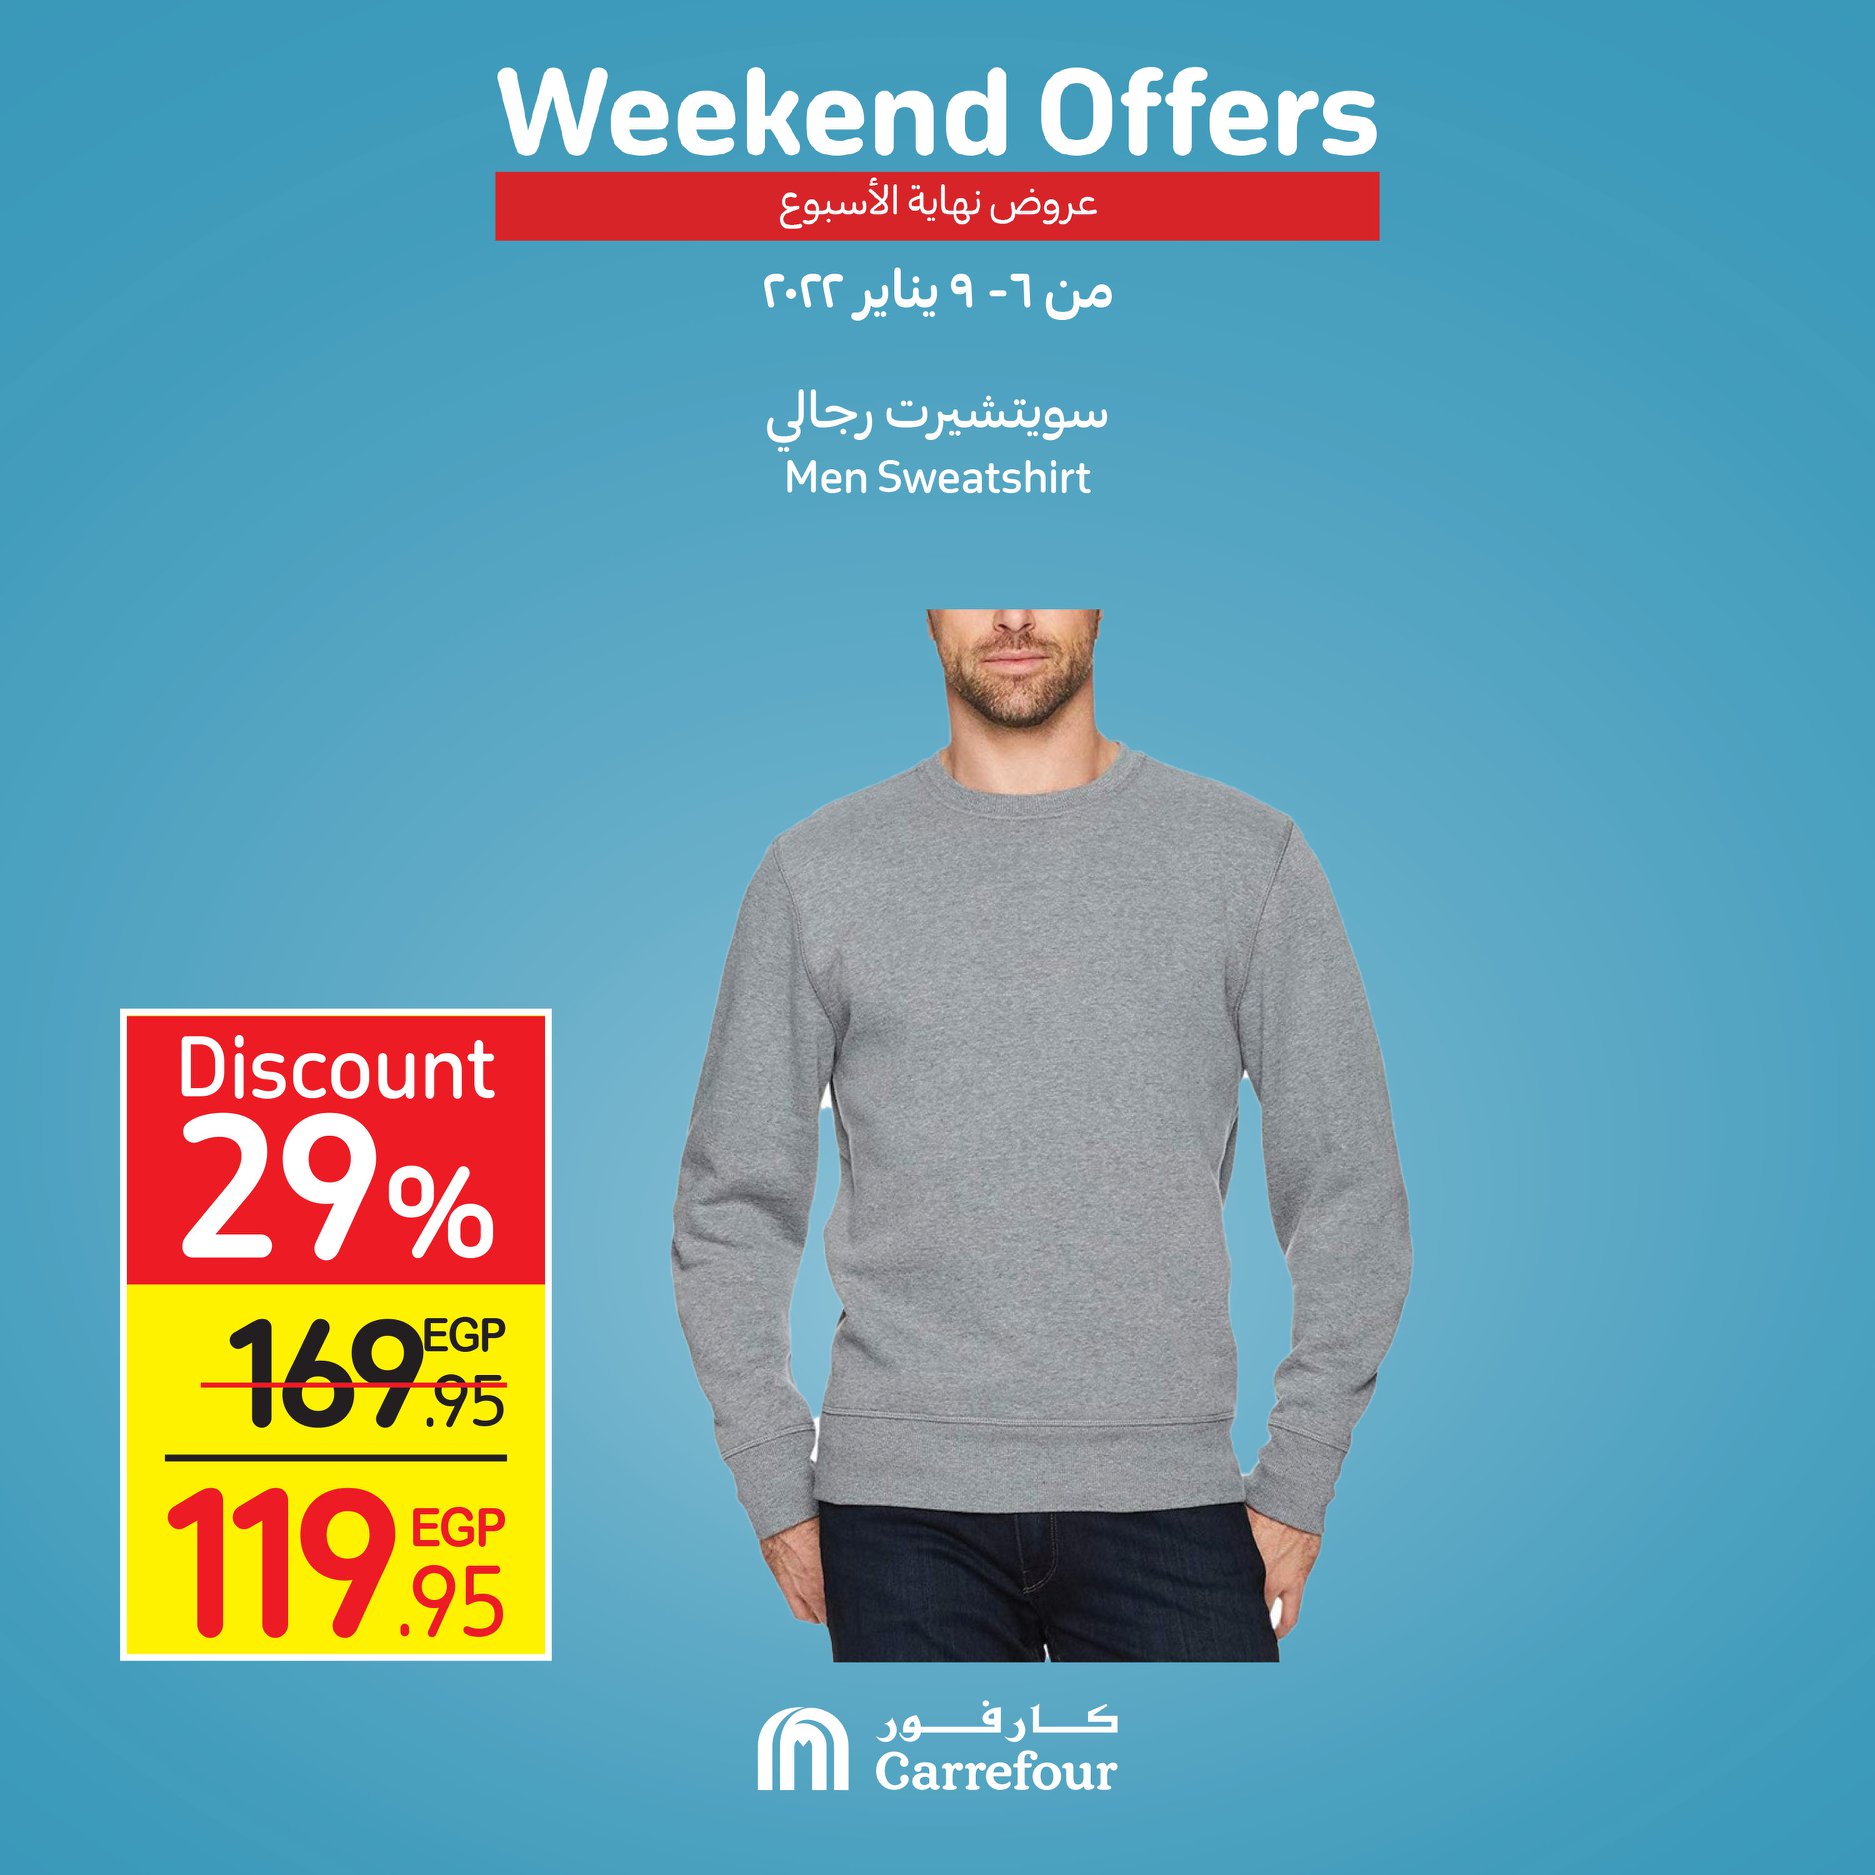 Now, the strongest offers and surprises from Carrefour, half-price discounts, at Weekend until January 16th, 41